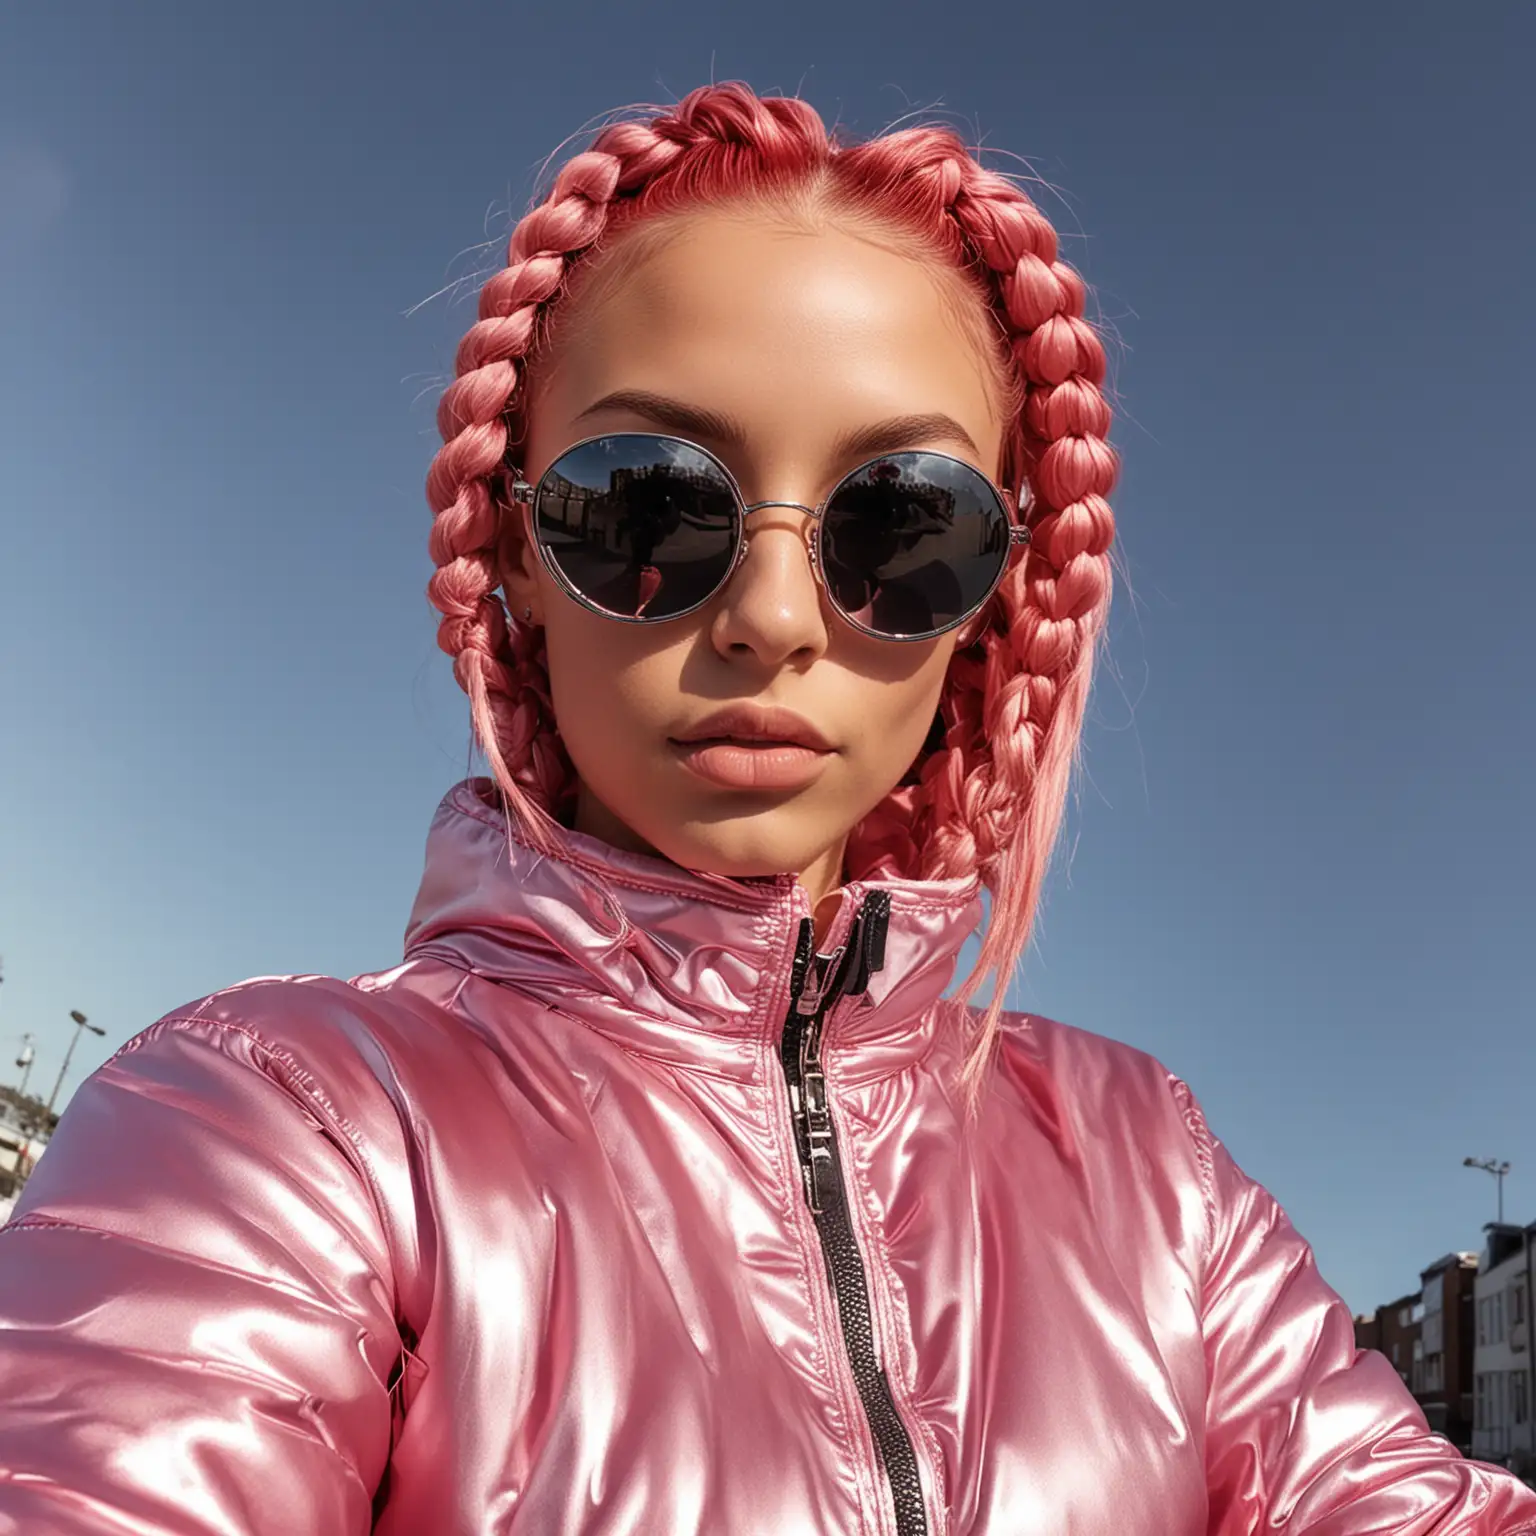 Futuristic Y2K Style Fashion Model in Chrome Sunglasses and Red Tracksuit